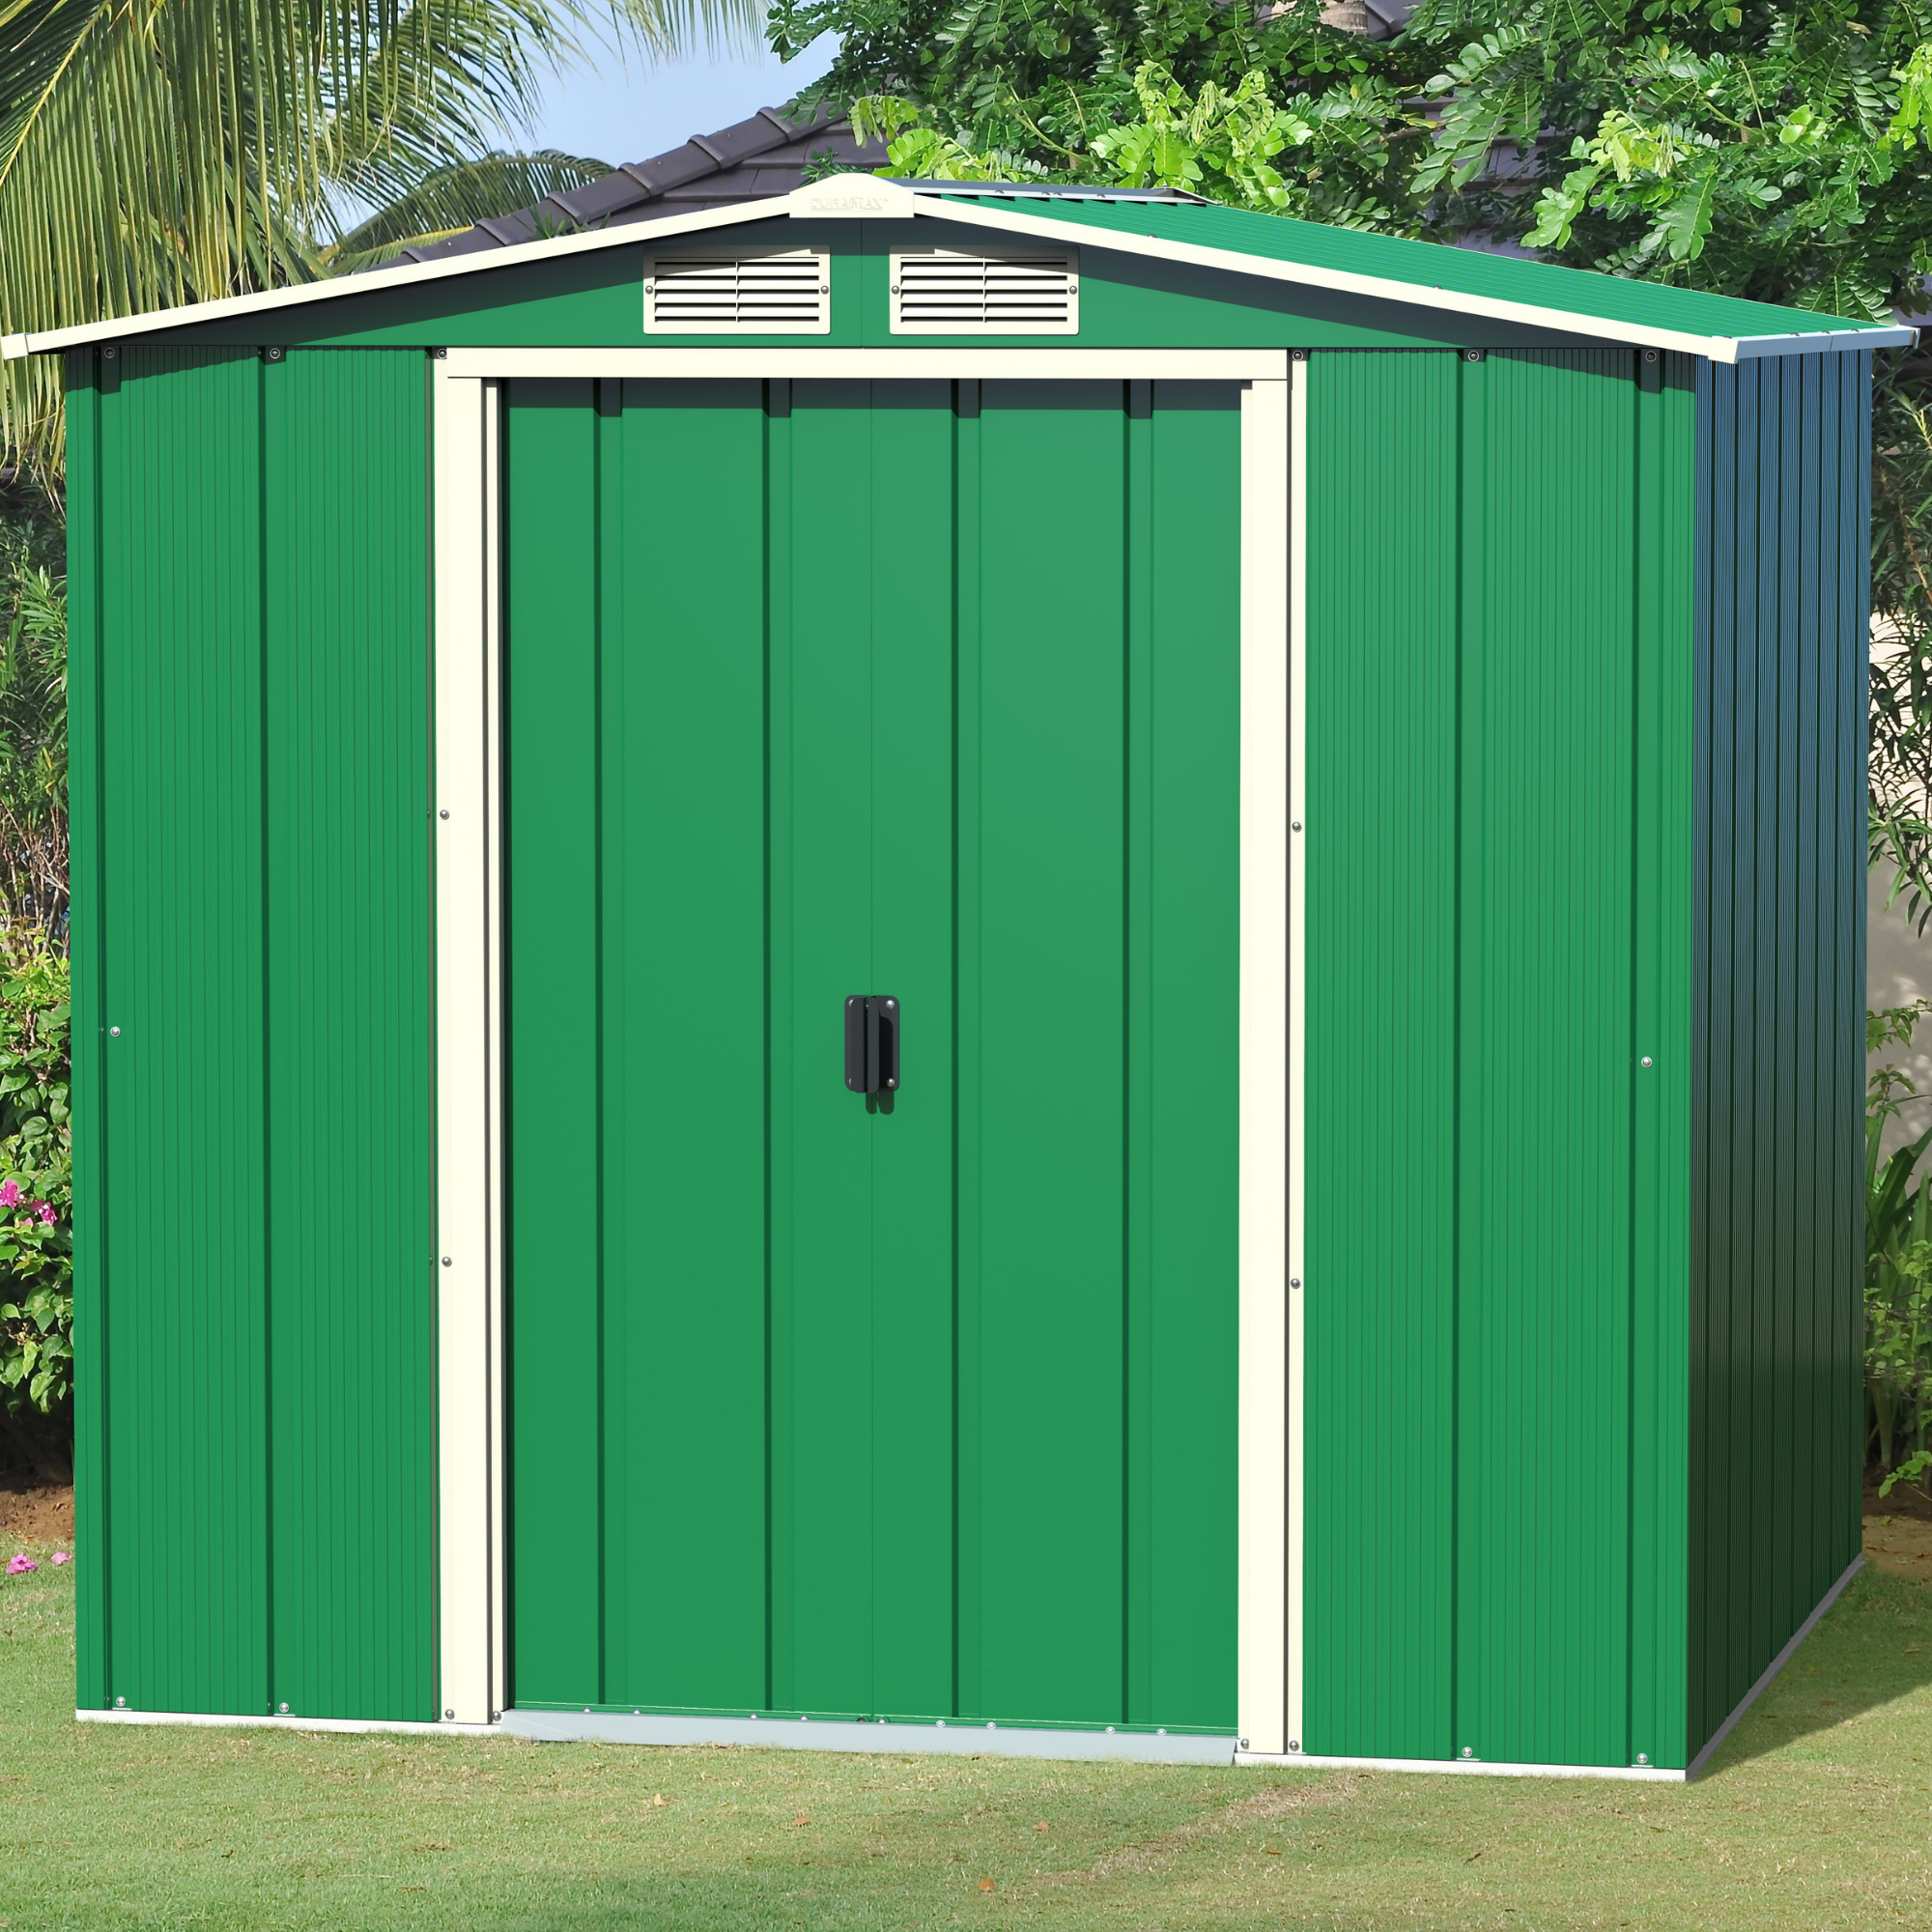 BillyOh Partner Eco Apex Roof Metal Shed - 6x6 Apex Eco - Duramax Eco Metal Shed